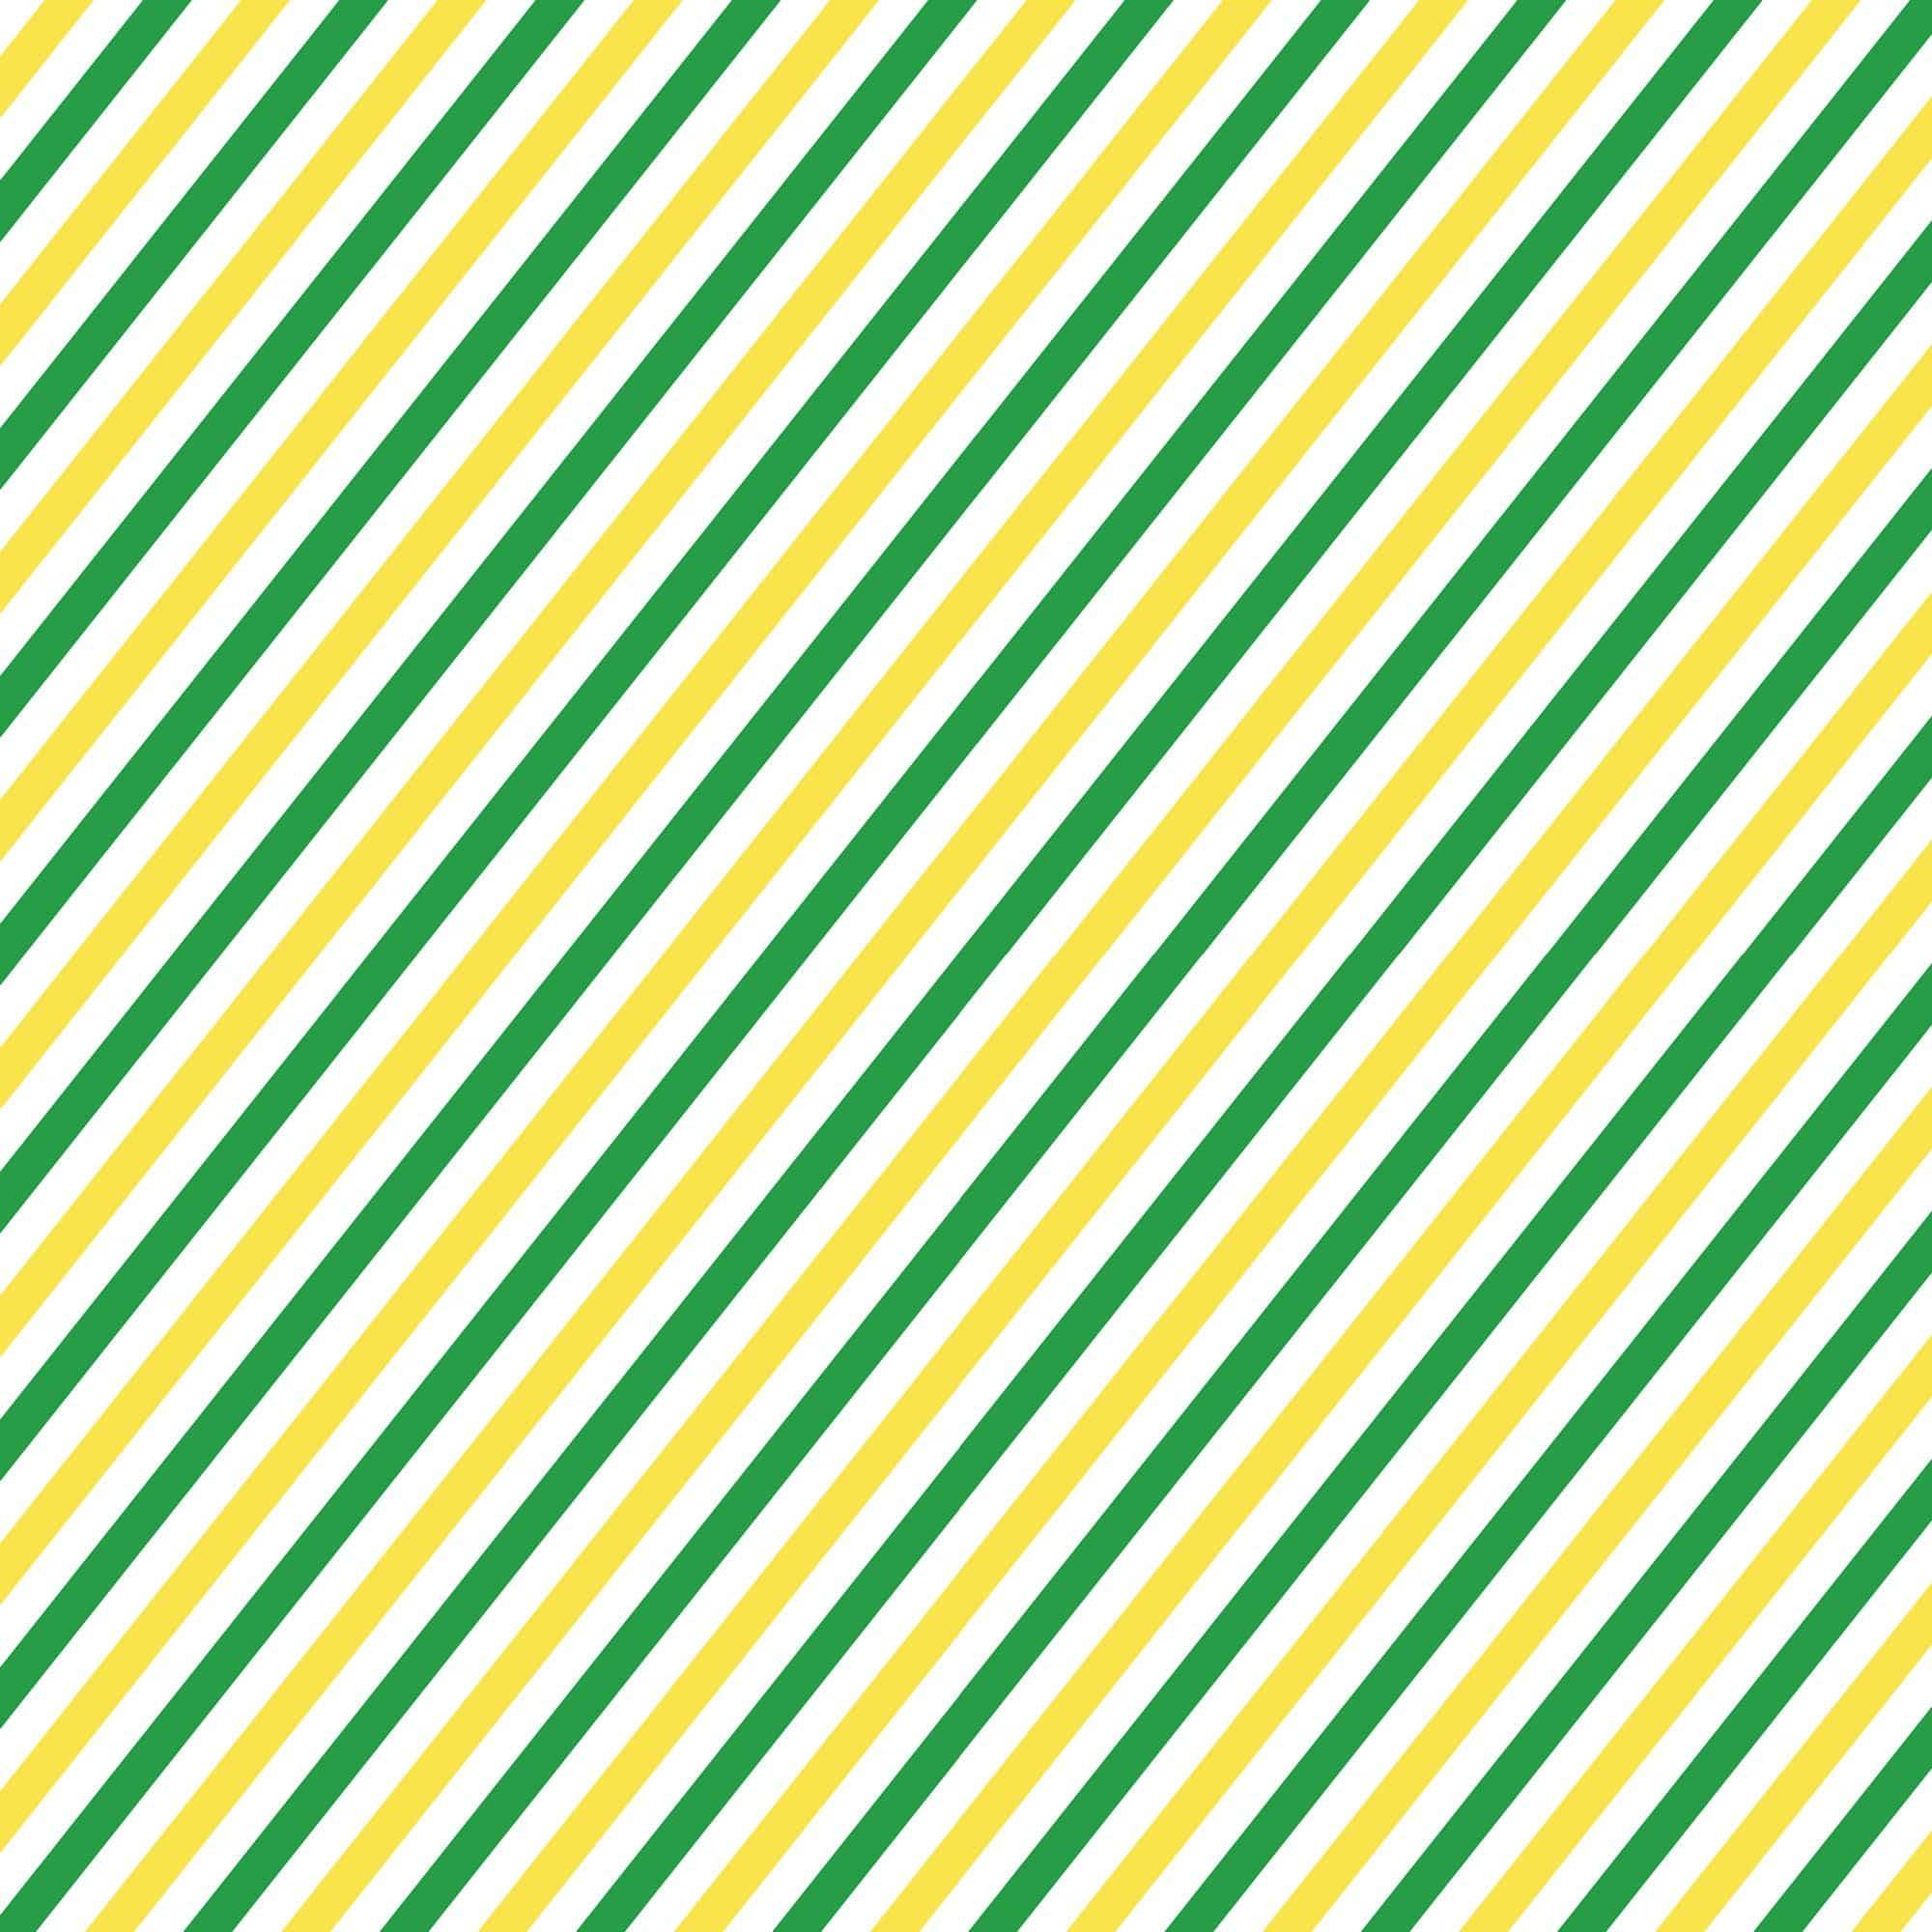 Tractor Time Collection Green Machine 12 x 12 Double-Sided Scrapbook Paper by SSC Designs - Scrapbook Supply Companies